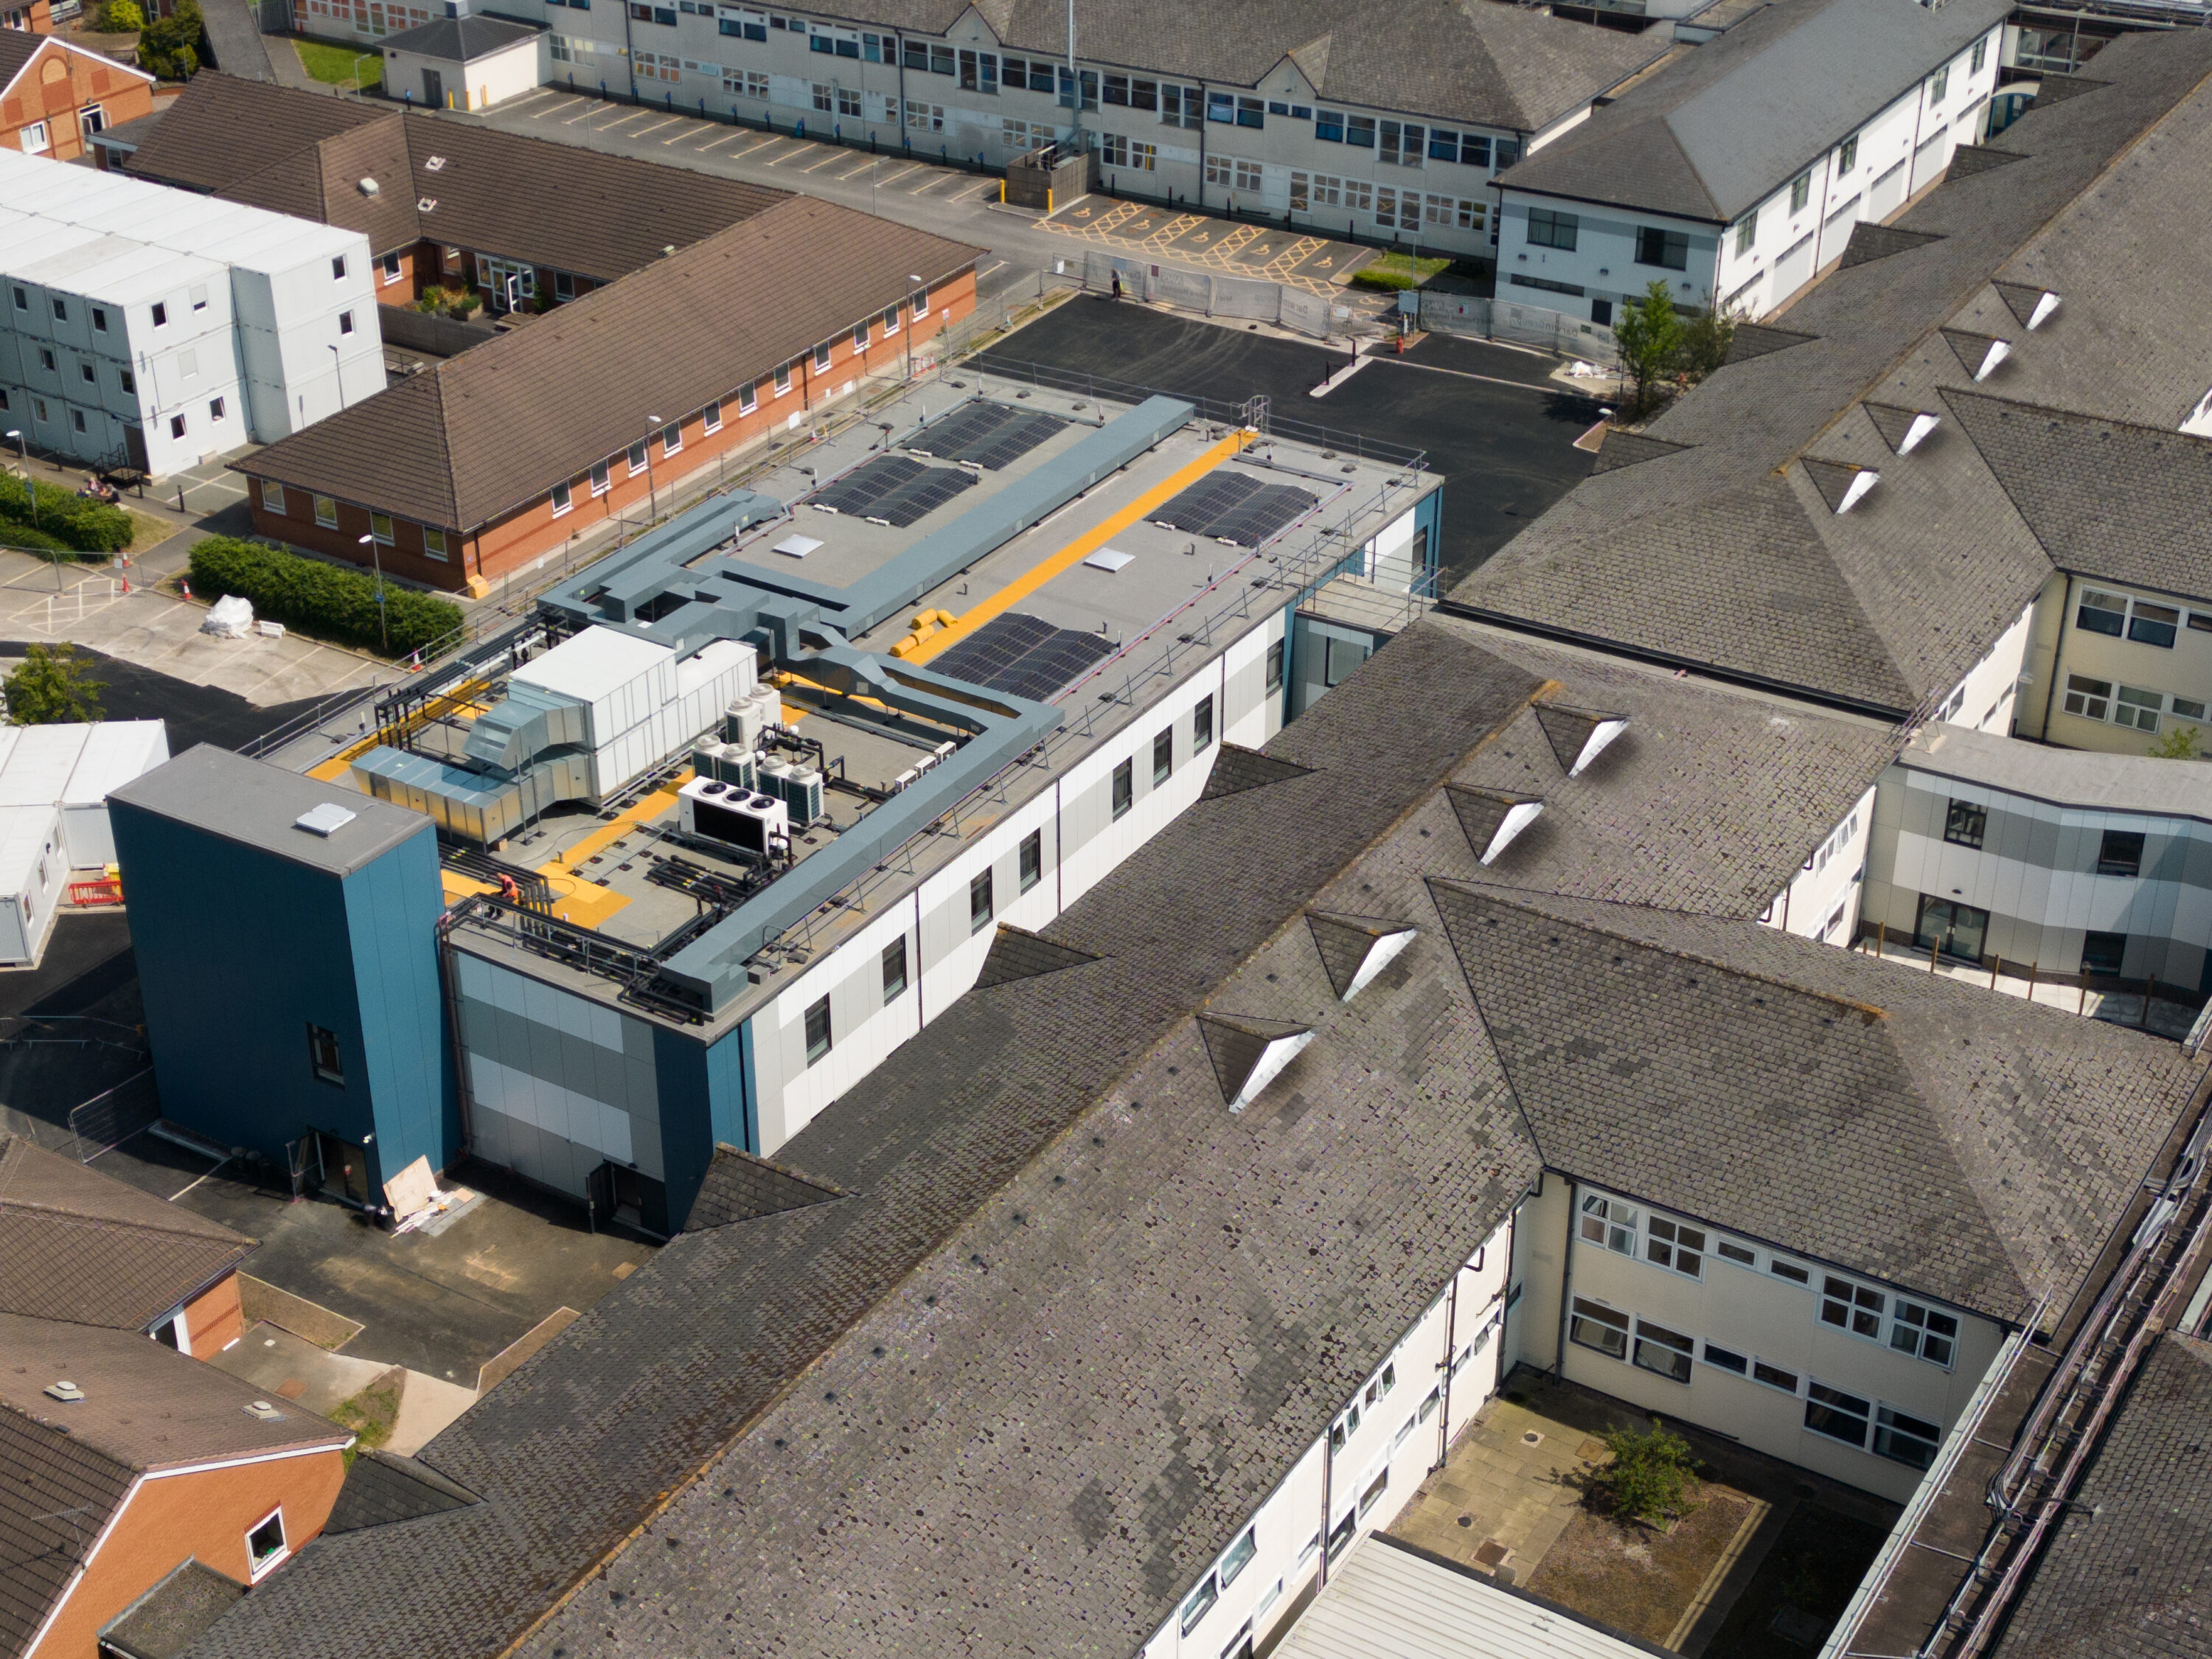 A three-quarters overhead view of the new ward building at Leighton Hospital, showing a range of plant machinery on the roof. This includes four photovoltaic solar panel arrays and a number of HVAC and air-conditioning units. Surrounding the new ward building are the older brick buildings of the hospital estate. The new ward building is finished in blue, grey and white cladding.